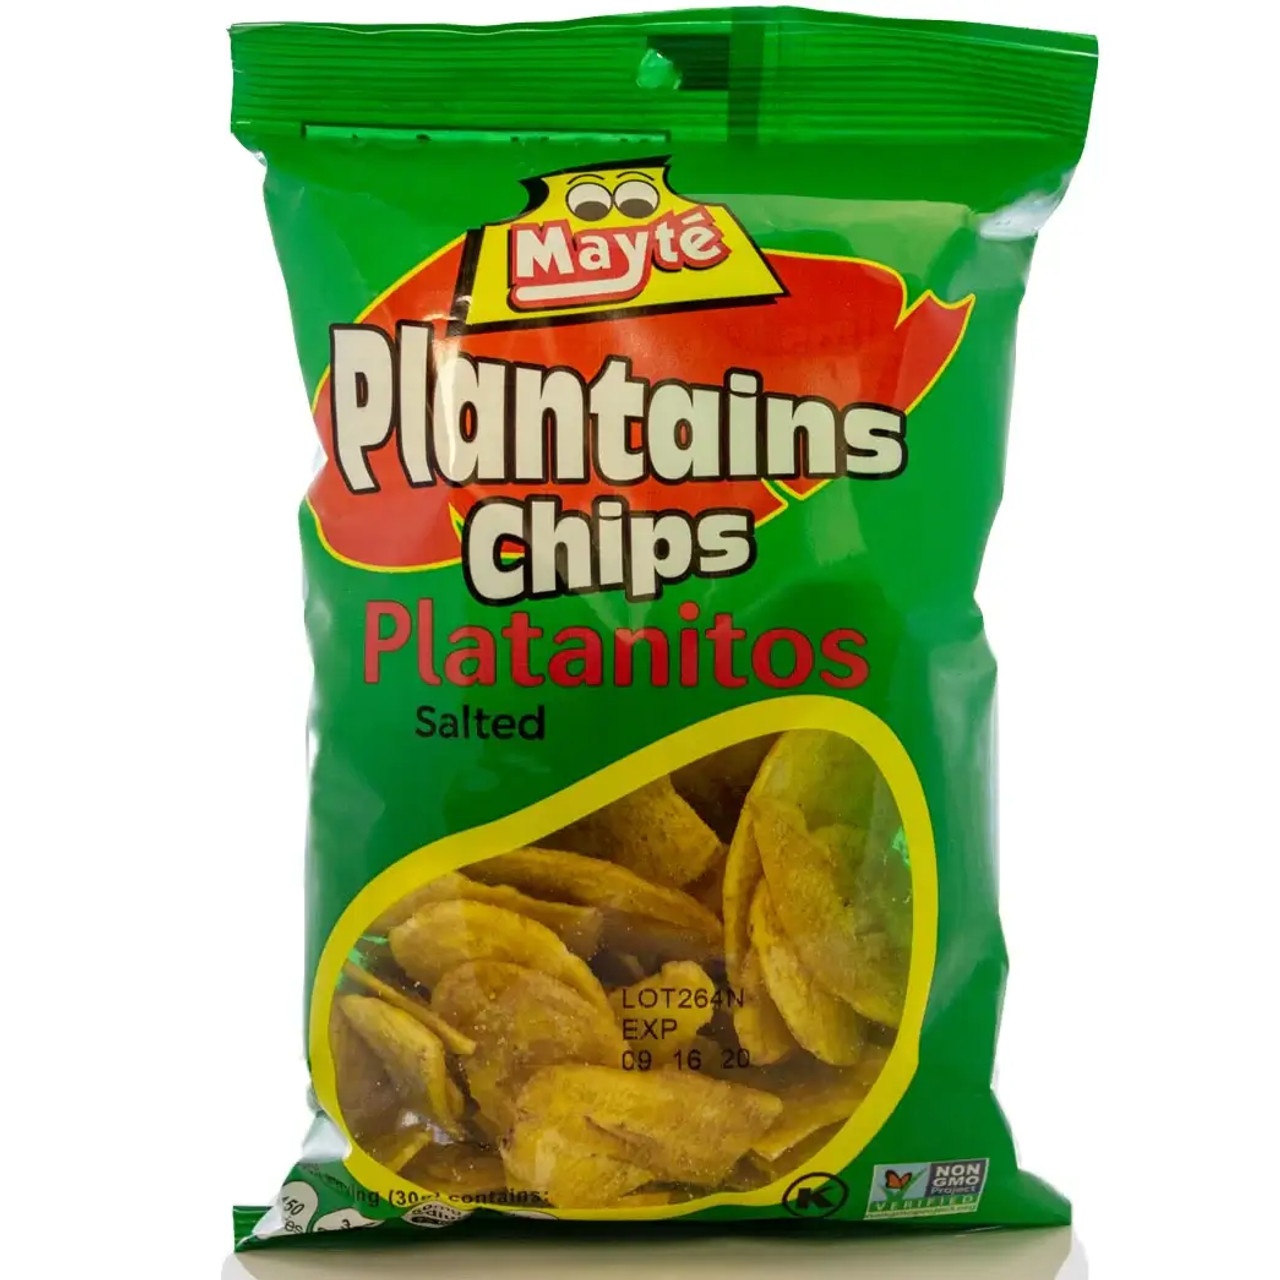 Mayte Plantain Chips Salted 3.2 oz/(30-Case) - Fresh and Crunchy Salted Plantain Snacks (Platanitos)
-Chicken Pieces